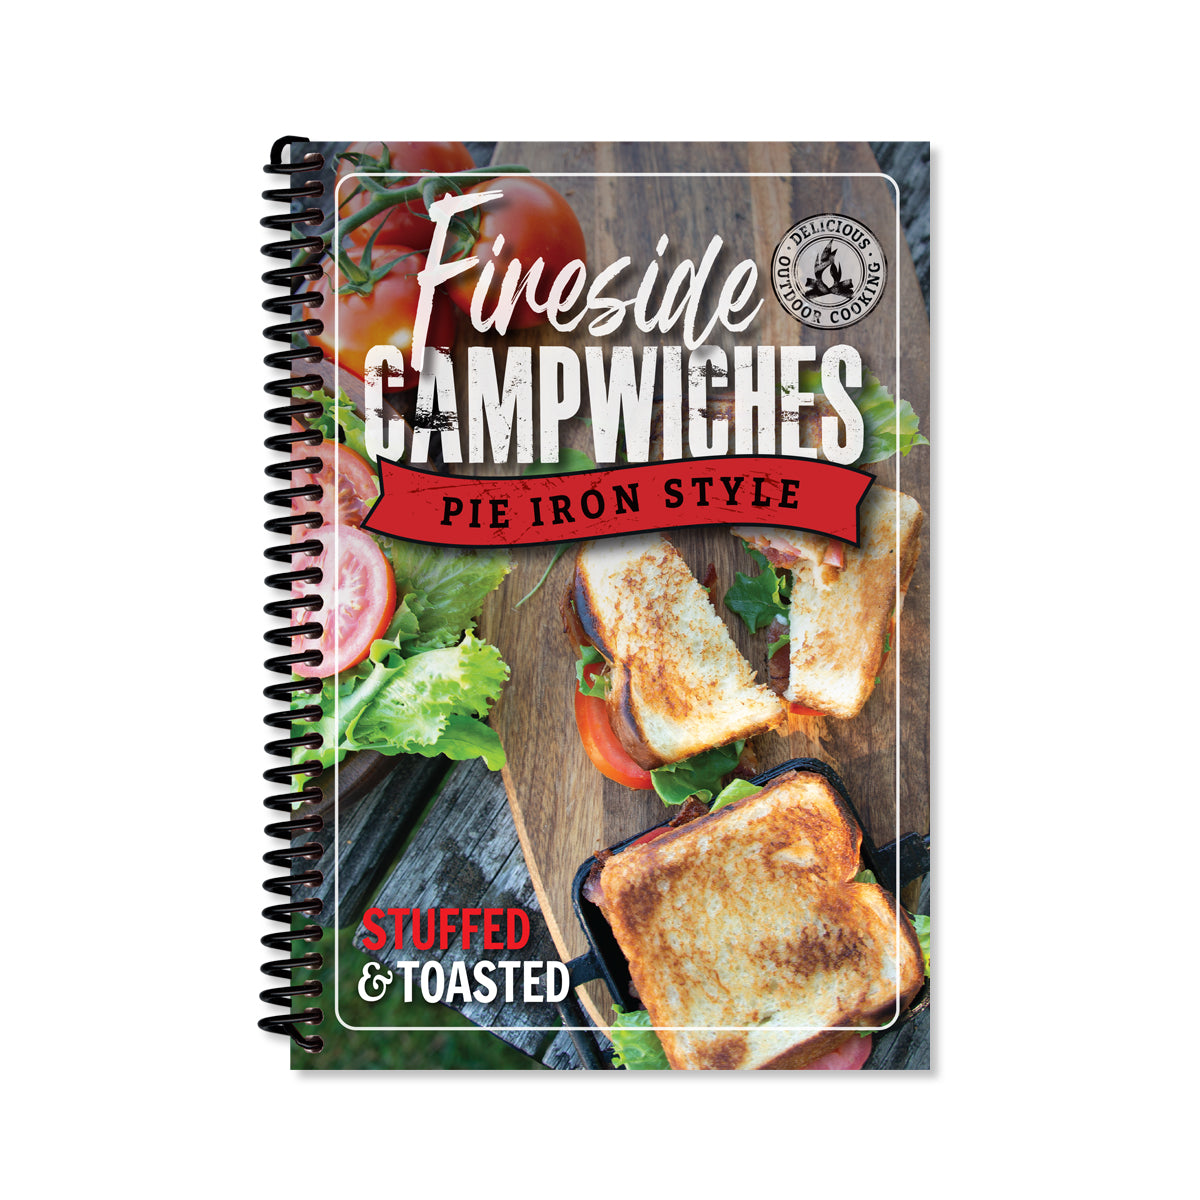 Fireside Campwiches